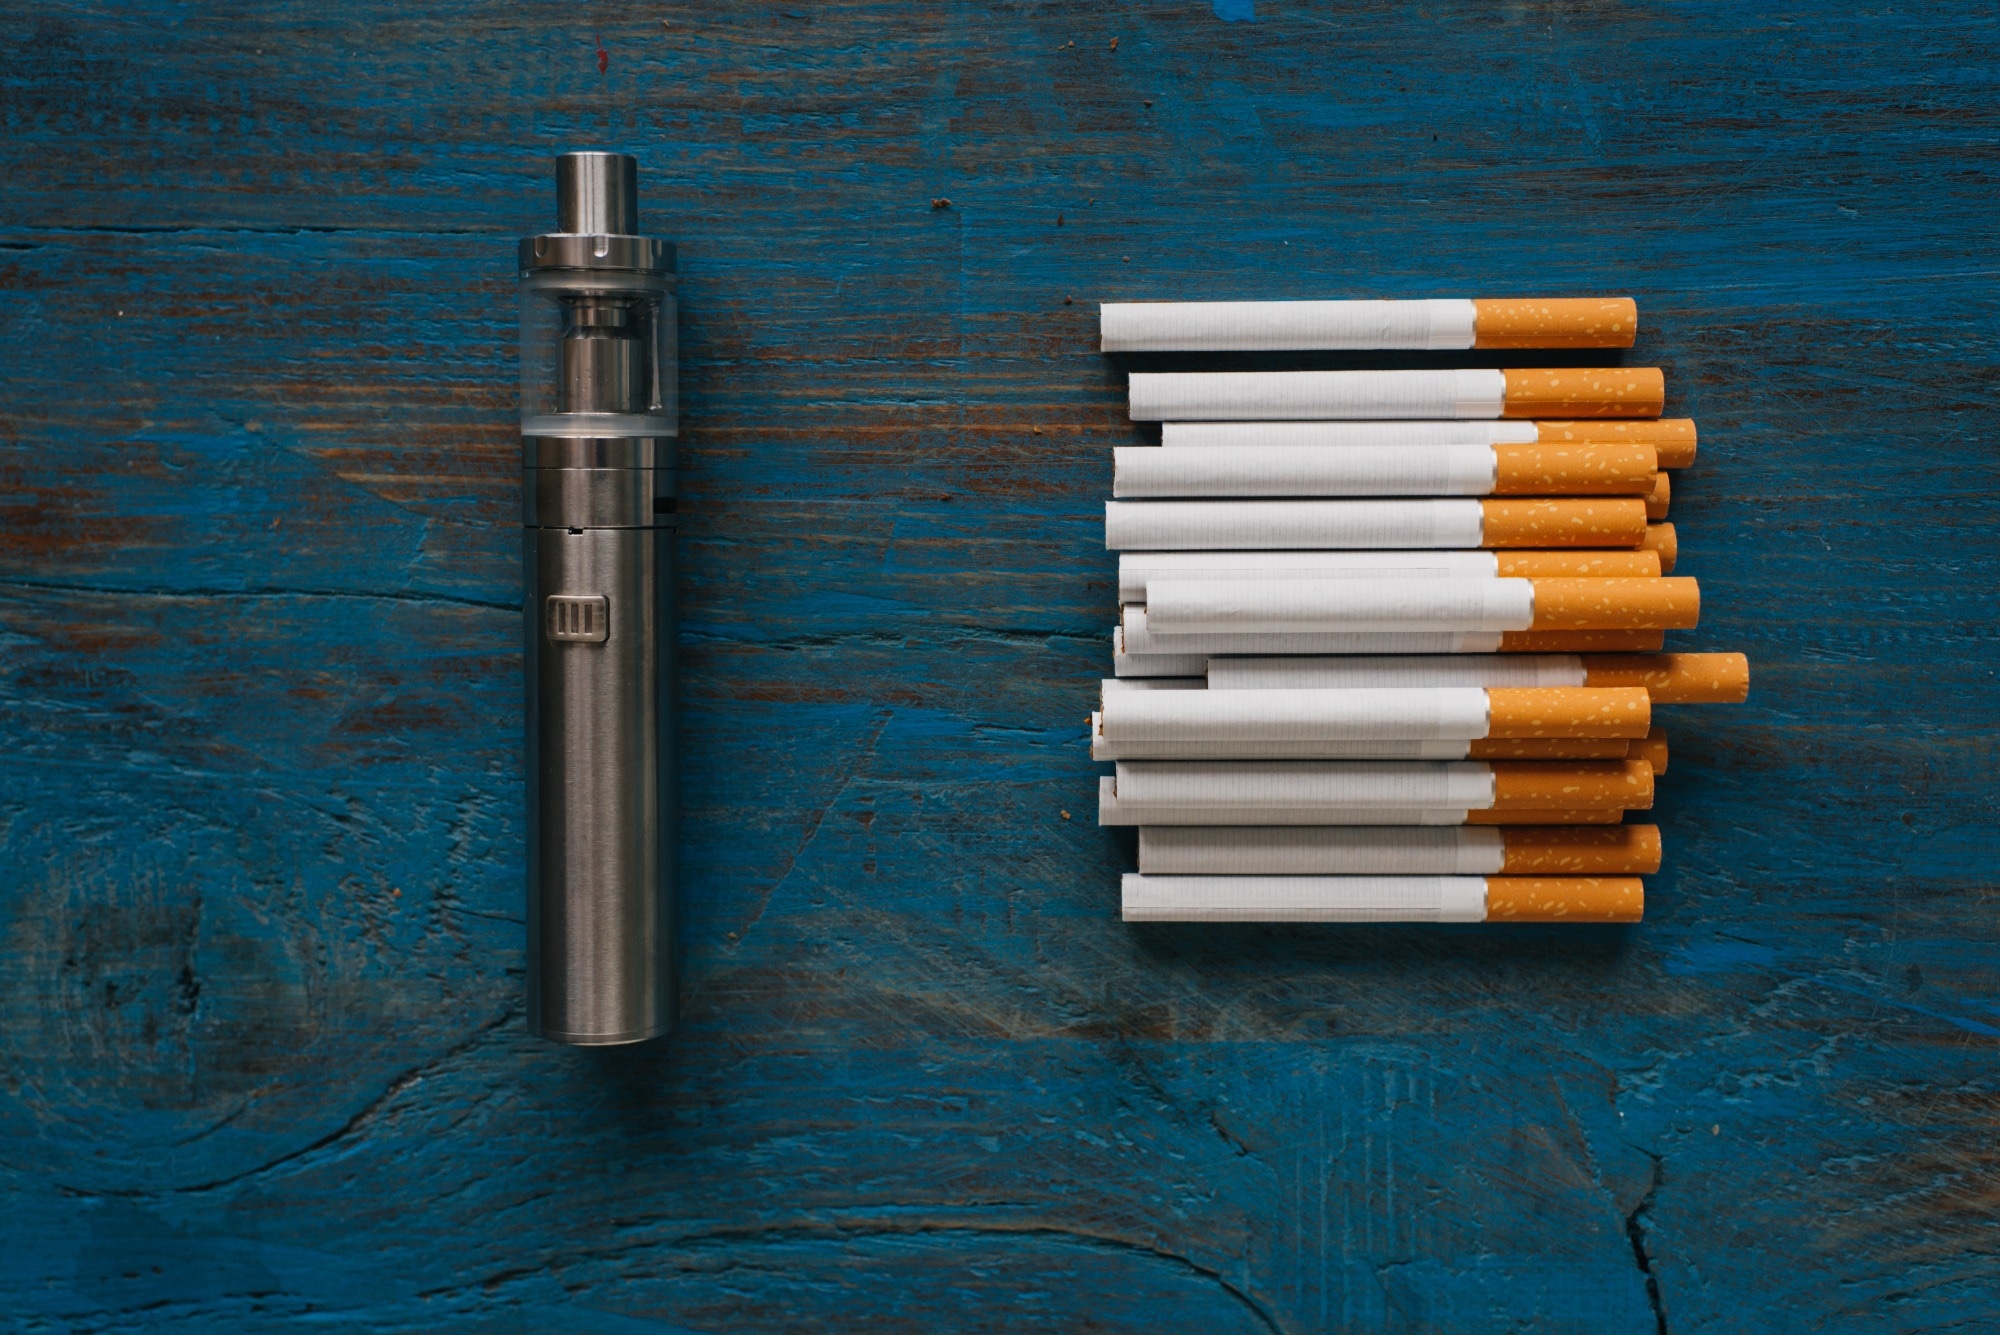 Study: Effects of reduced-risk nicotine-delivery products on smoking prevalence and cigarette sales: an observational study. Image Credit: Lumen Photos / Shutterstock